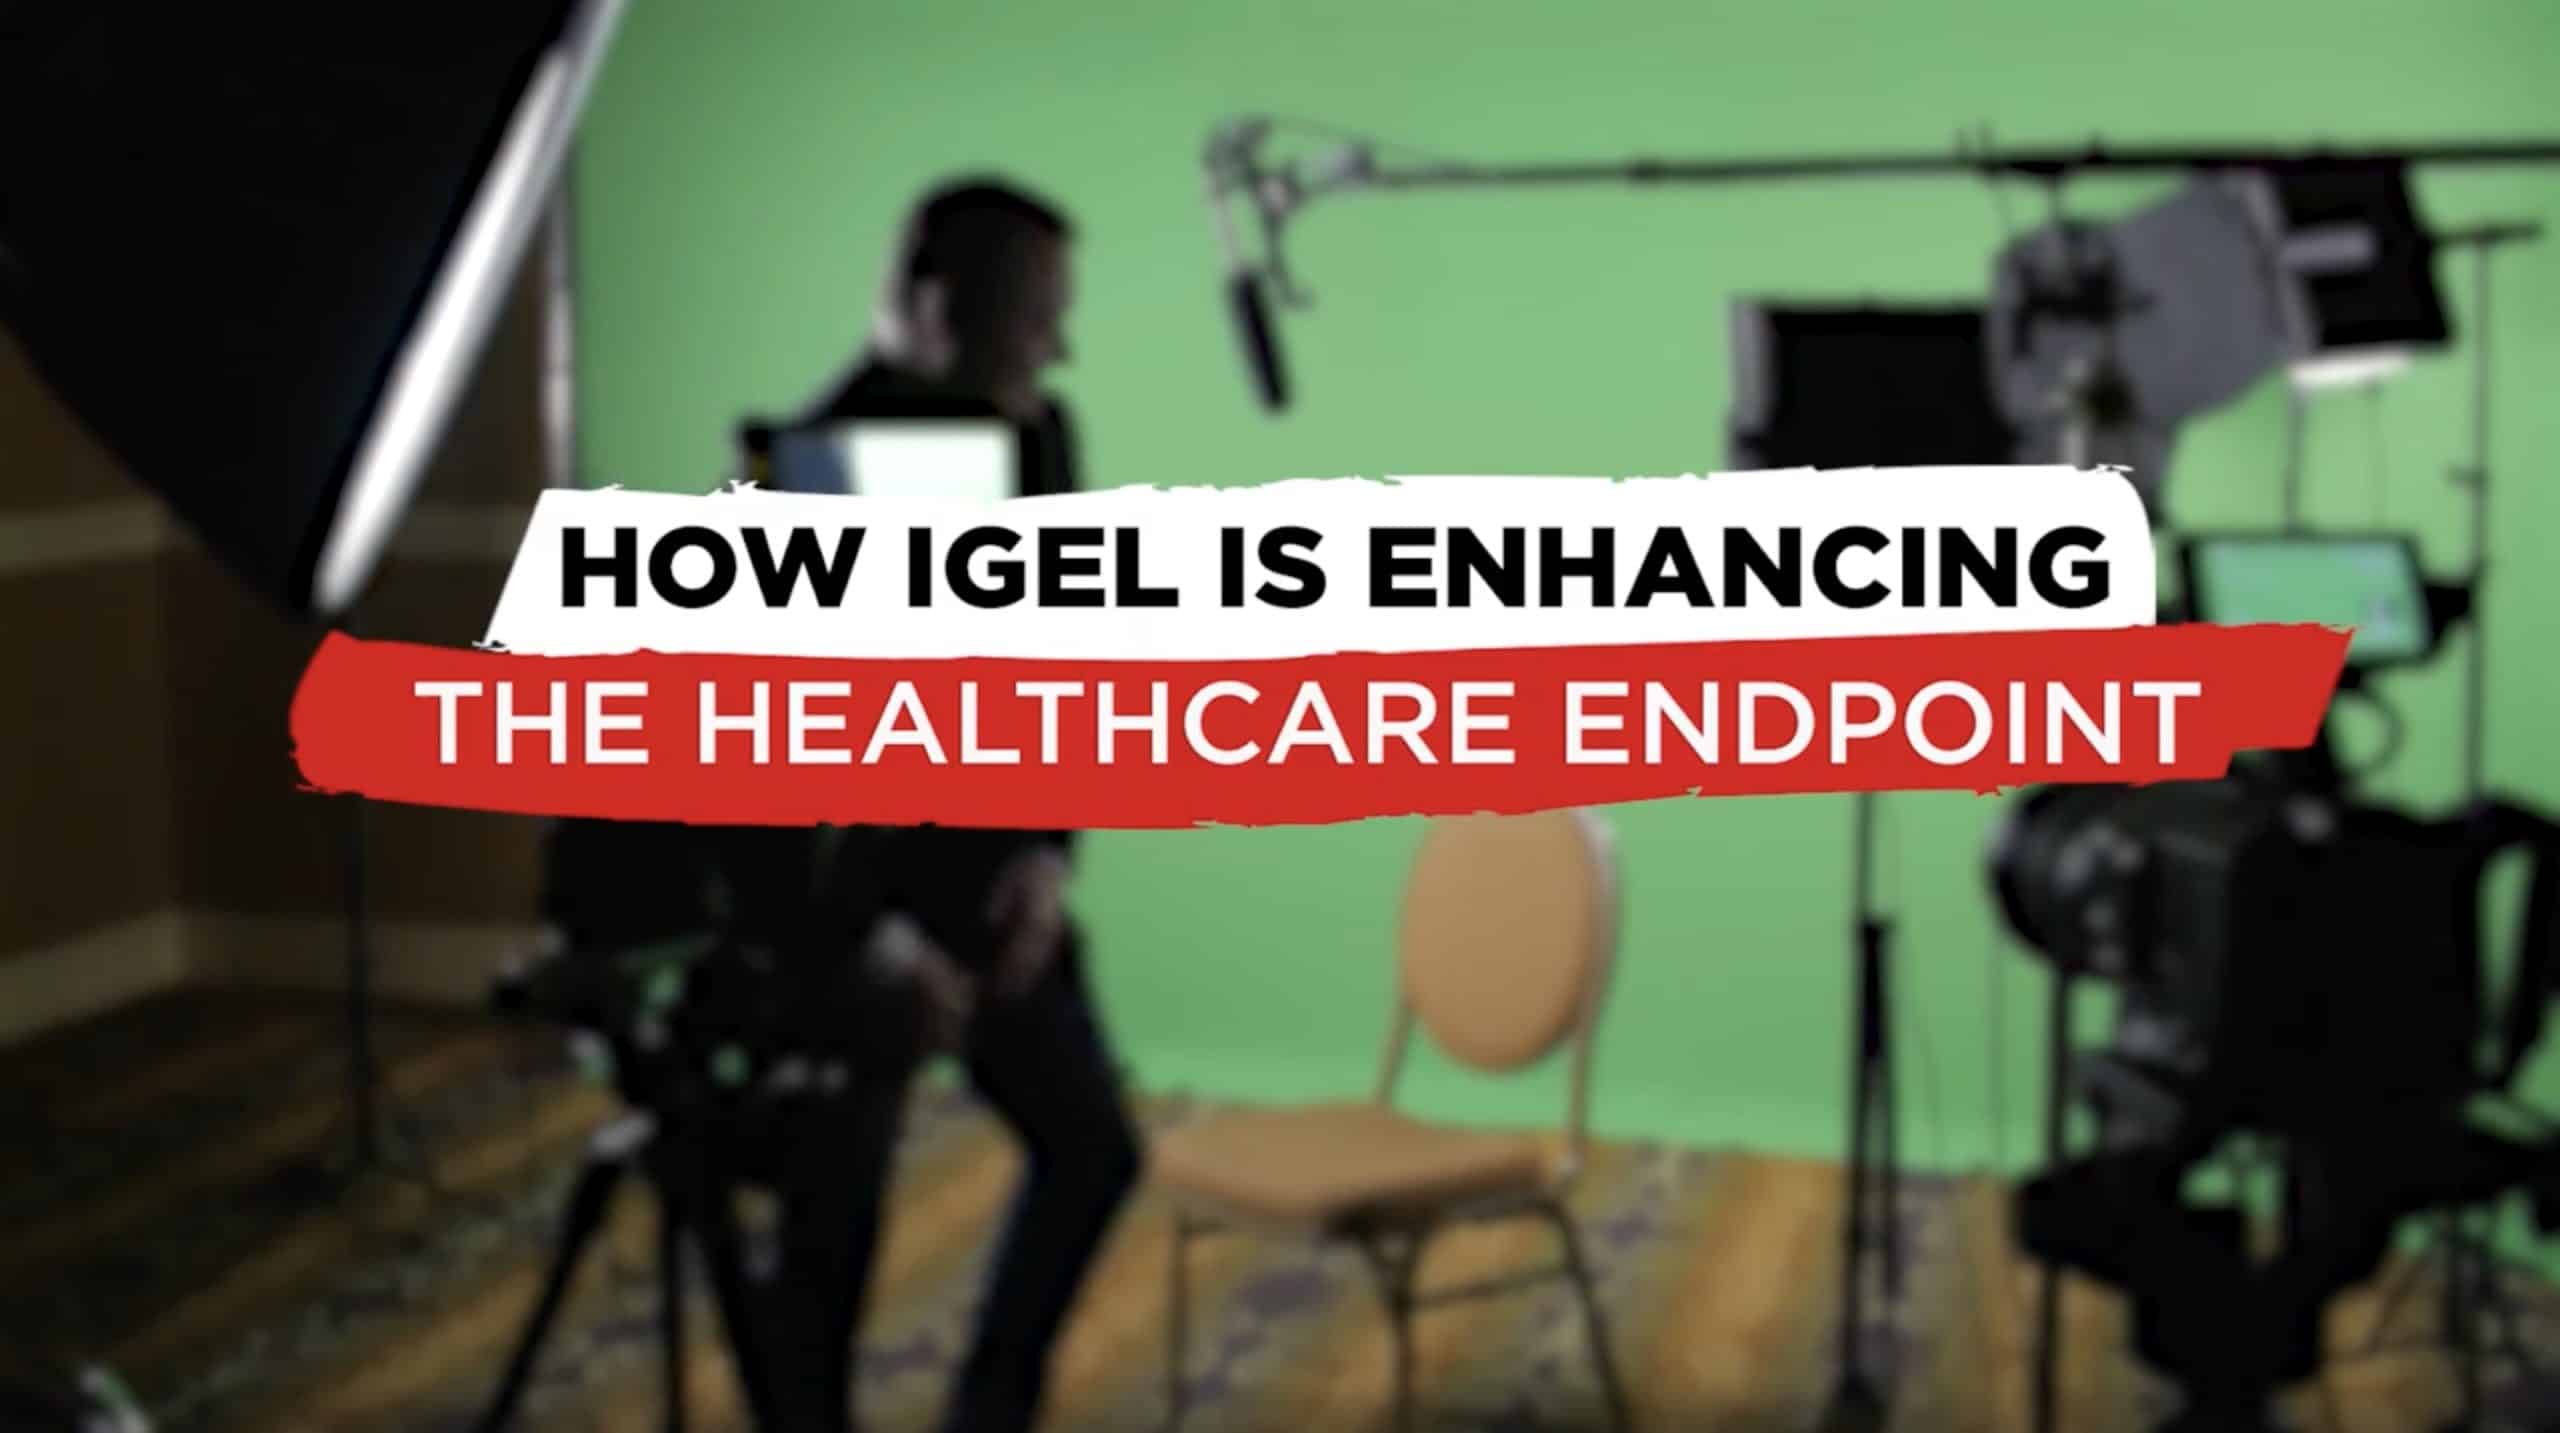 How IGEL is Enhancing the Healthcare Endpoint